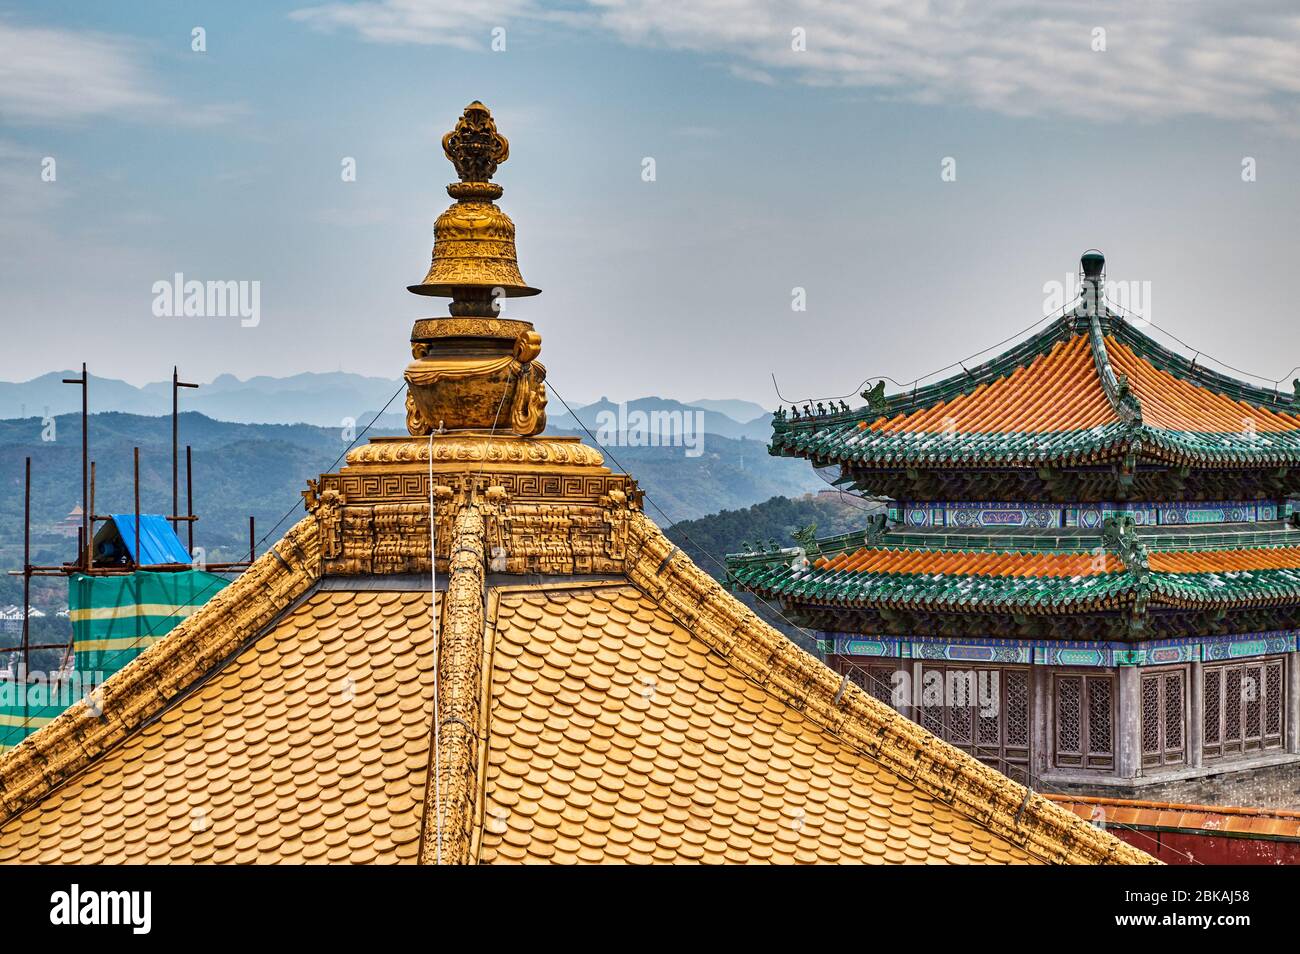 Putuo Zongcheng Buddhist Temple, one of the Eight Outer Temples of Chengde in Hebei province, China, built between 1767 and 1771 and modeled after the Stock Photo